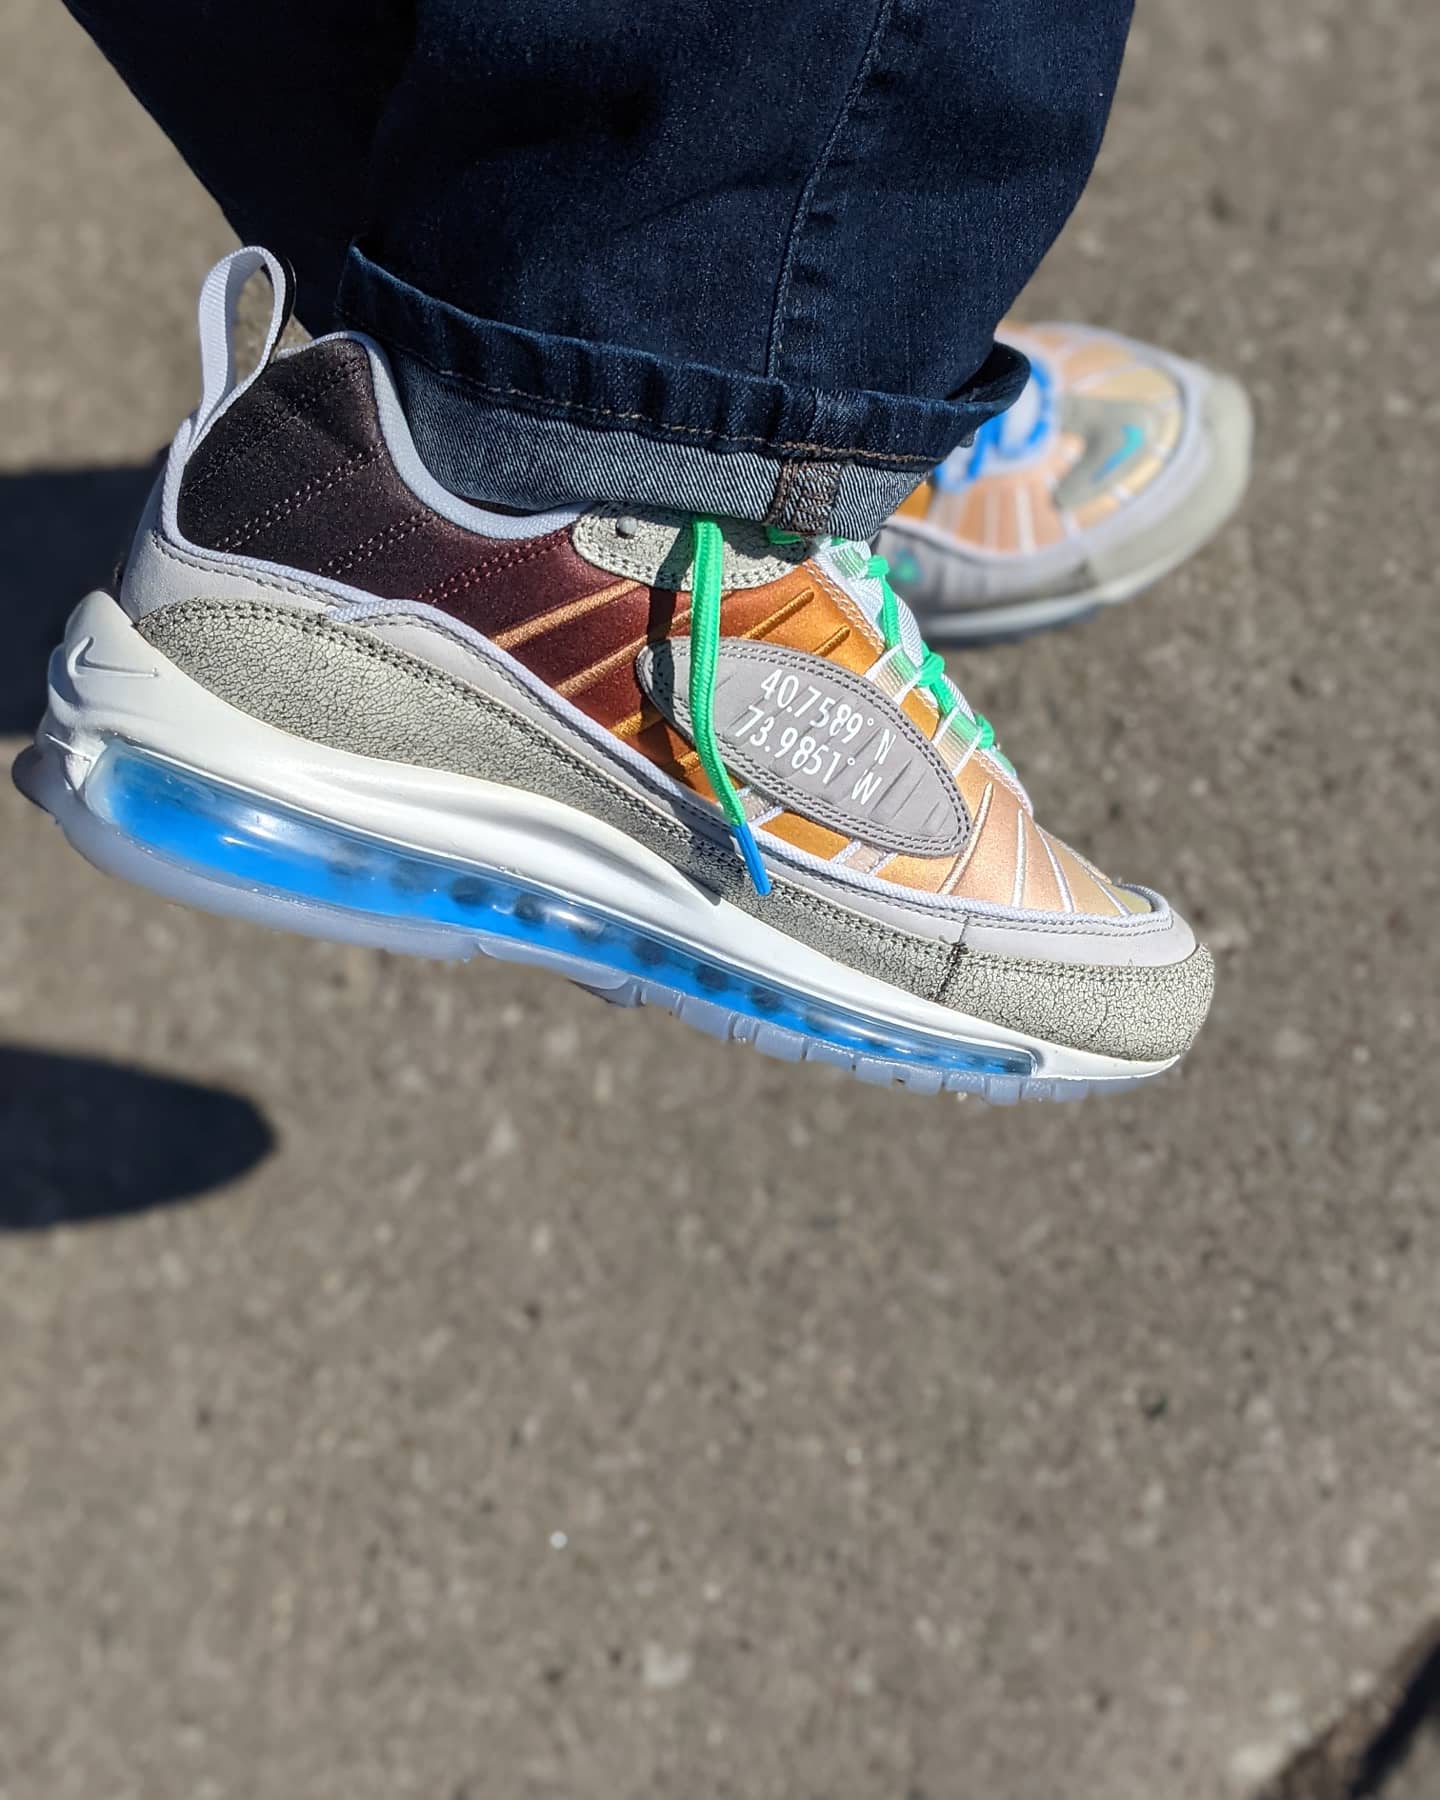 AirMax98 - Twitter Search / Twitter